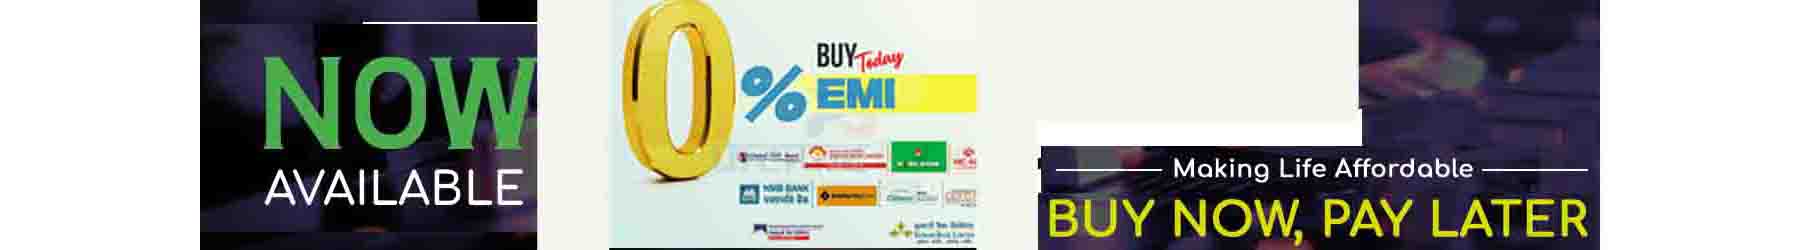 Buy now and pay later using our 0% down payment and 0% interest EMI service